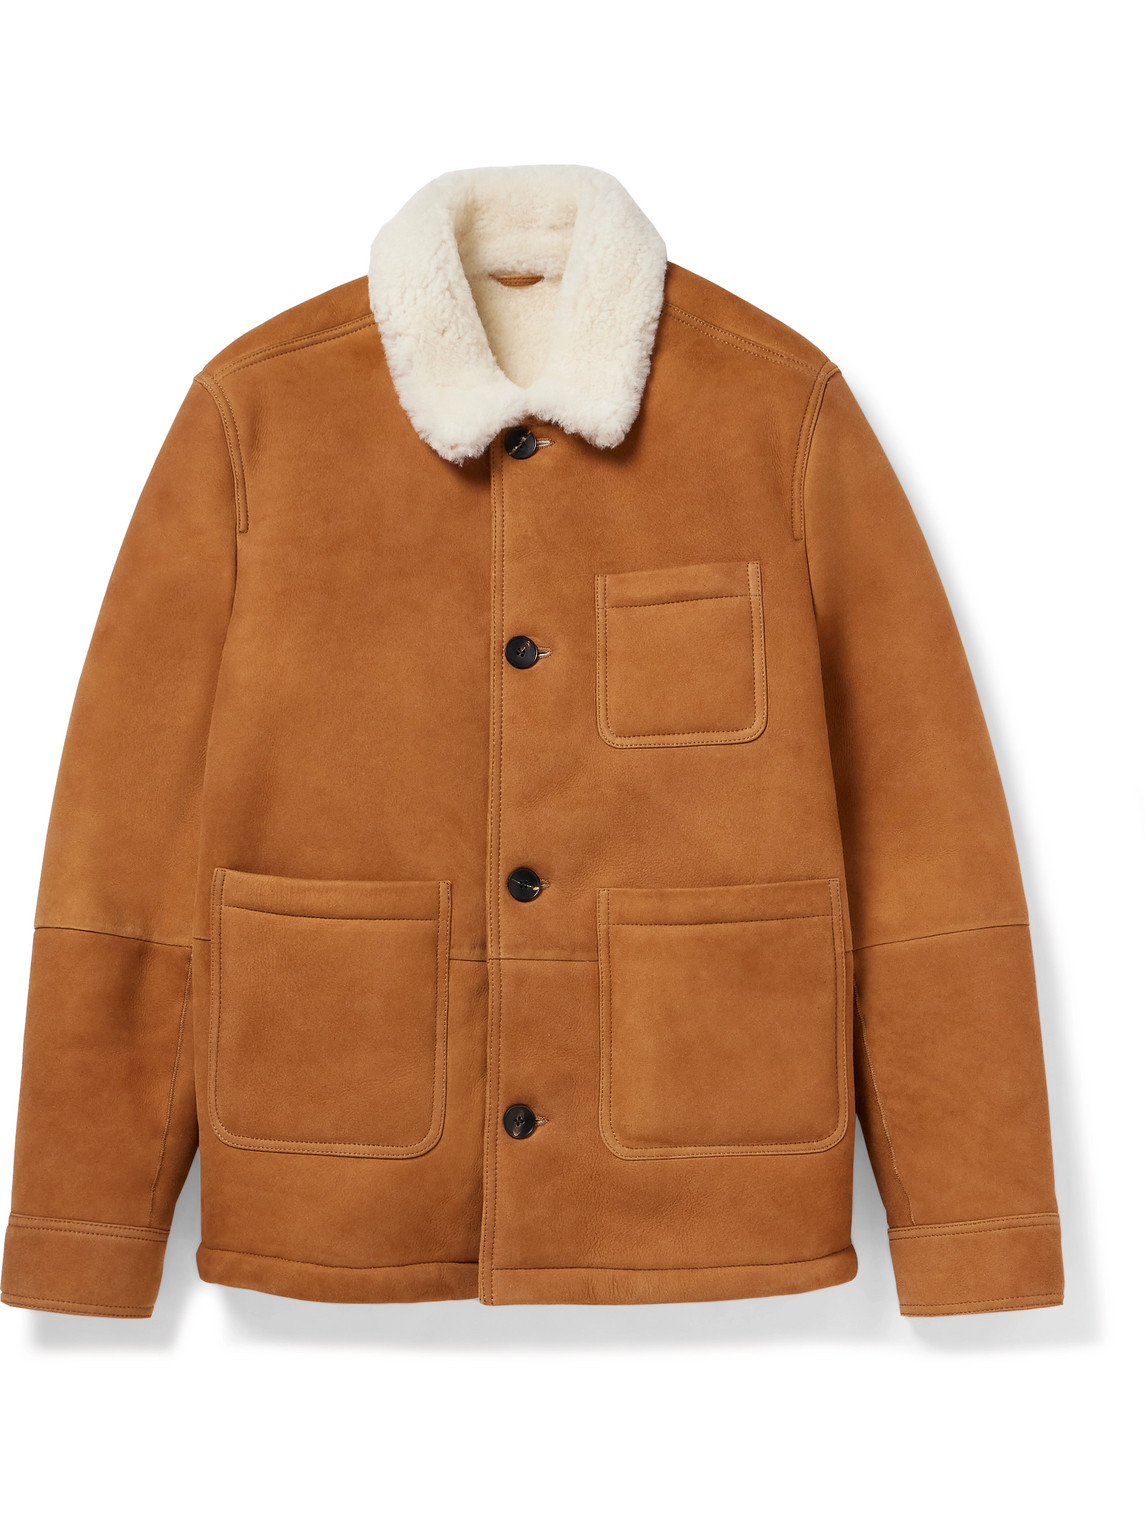 Mr P Shearling Chore Jacket In Brown